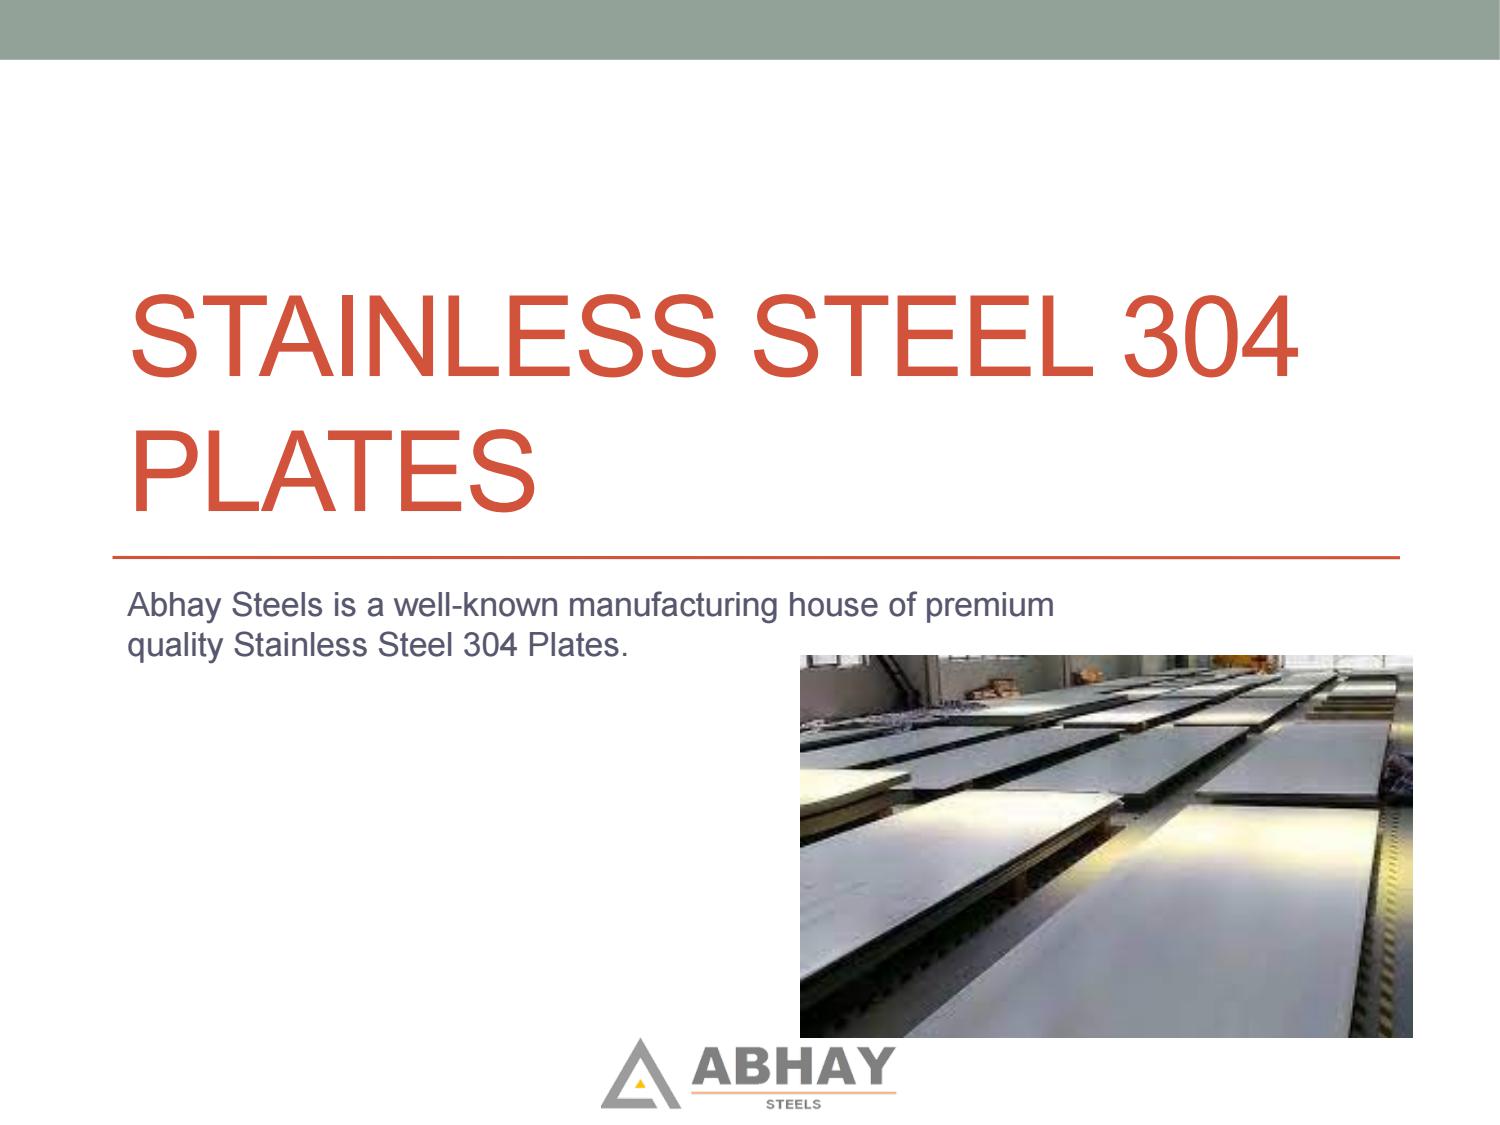 STAINLESS STEEL 304
PLATES

Abhay Steels is a well-known manufacturing house of premium
quality Stainless Steel 304 Plates.